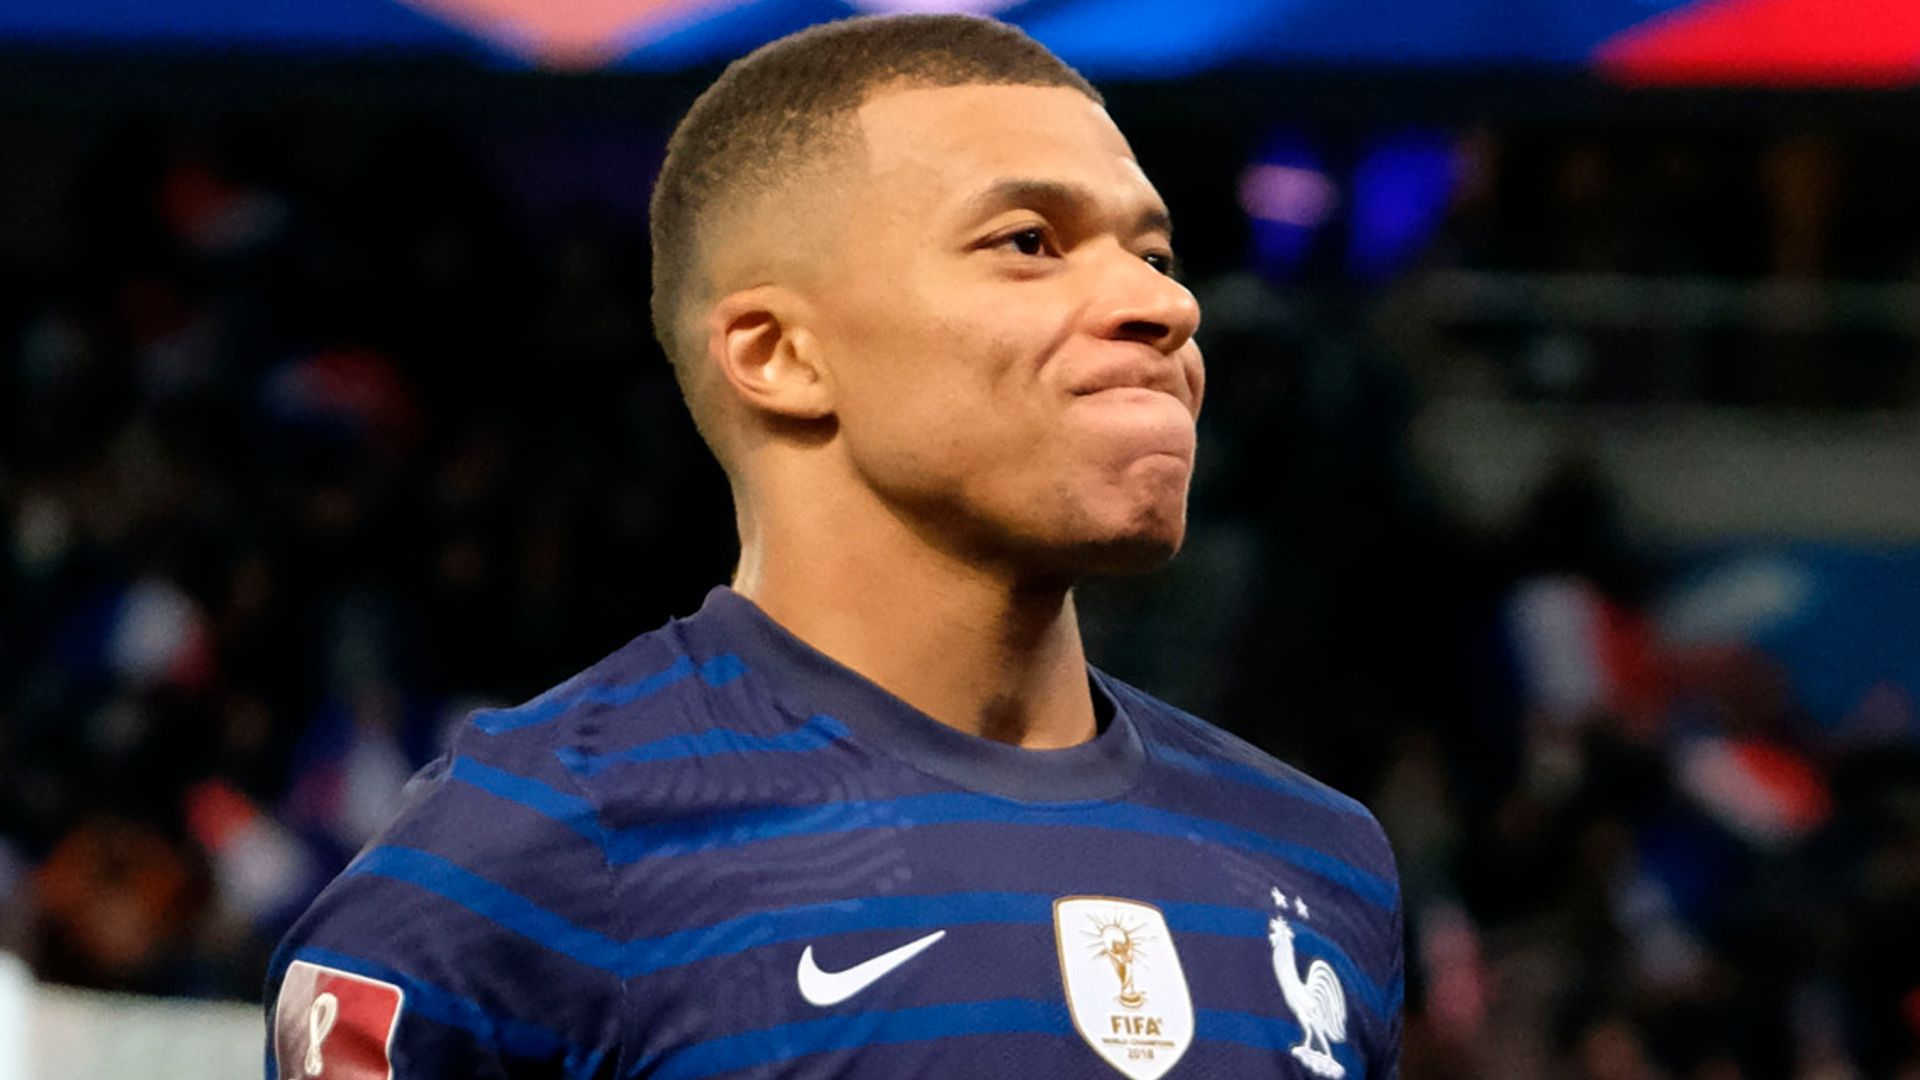 Nations League: Belgium vs Netherlands, France in action LIVE!